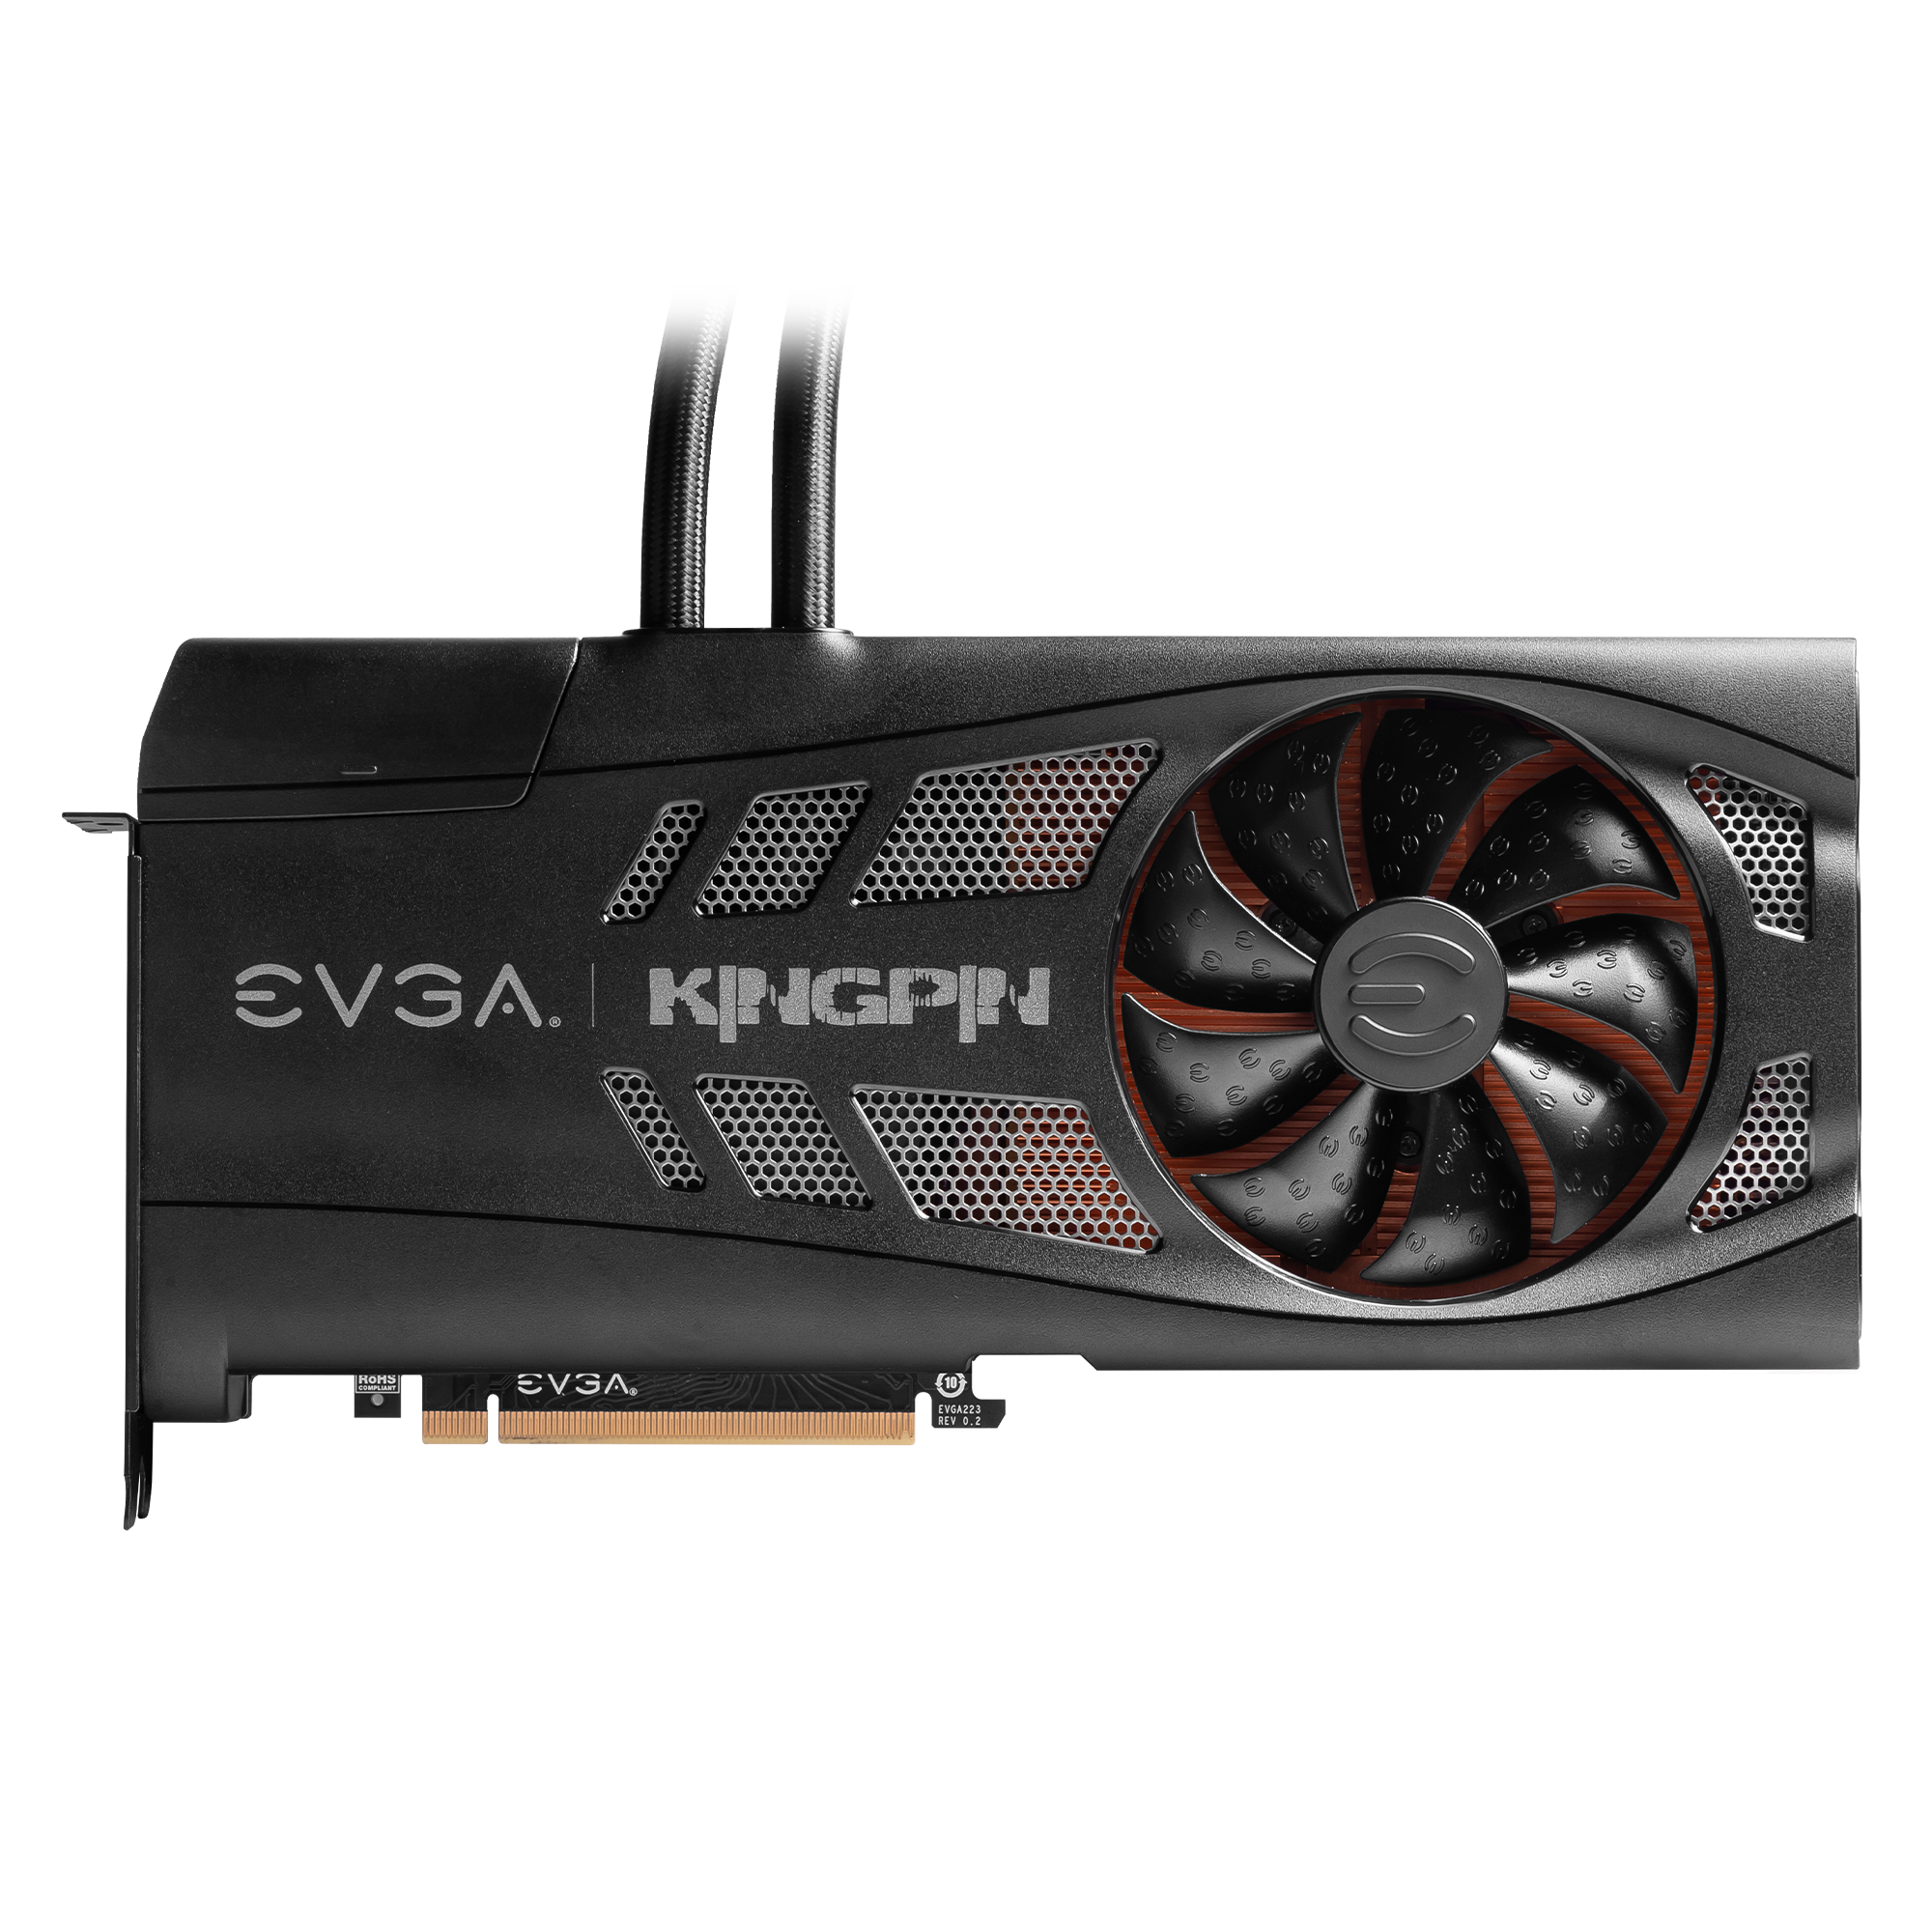 Media asset in full size related to 3dfxzone.it news item entitled as follows: EVGA annuncia la GeForce RTX 3090 K|NGP|N HYBRID GAMING da $2000 | Image Name: news31353_EVGA-GeForce-RTX-3090-KINGPIN-HYBRID-GAMING_3.png